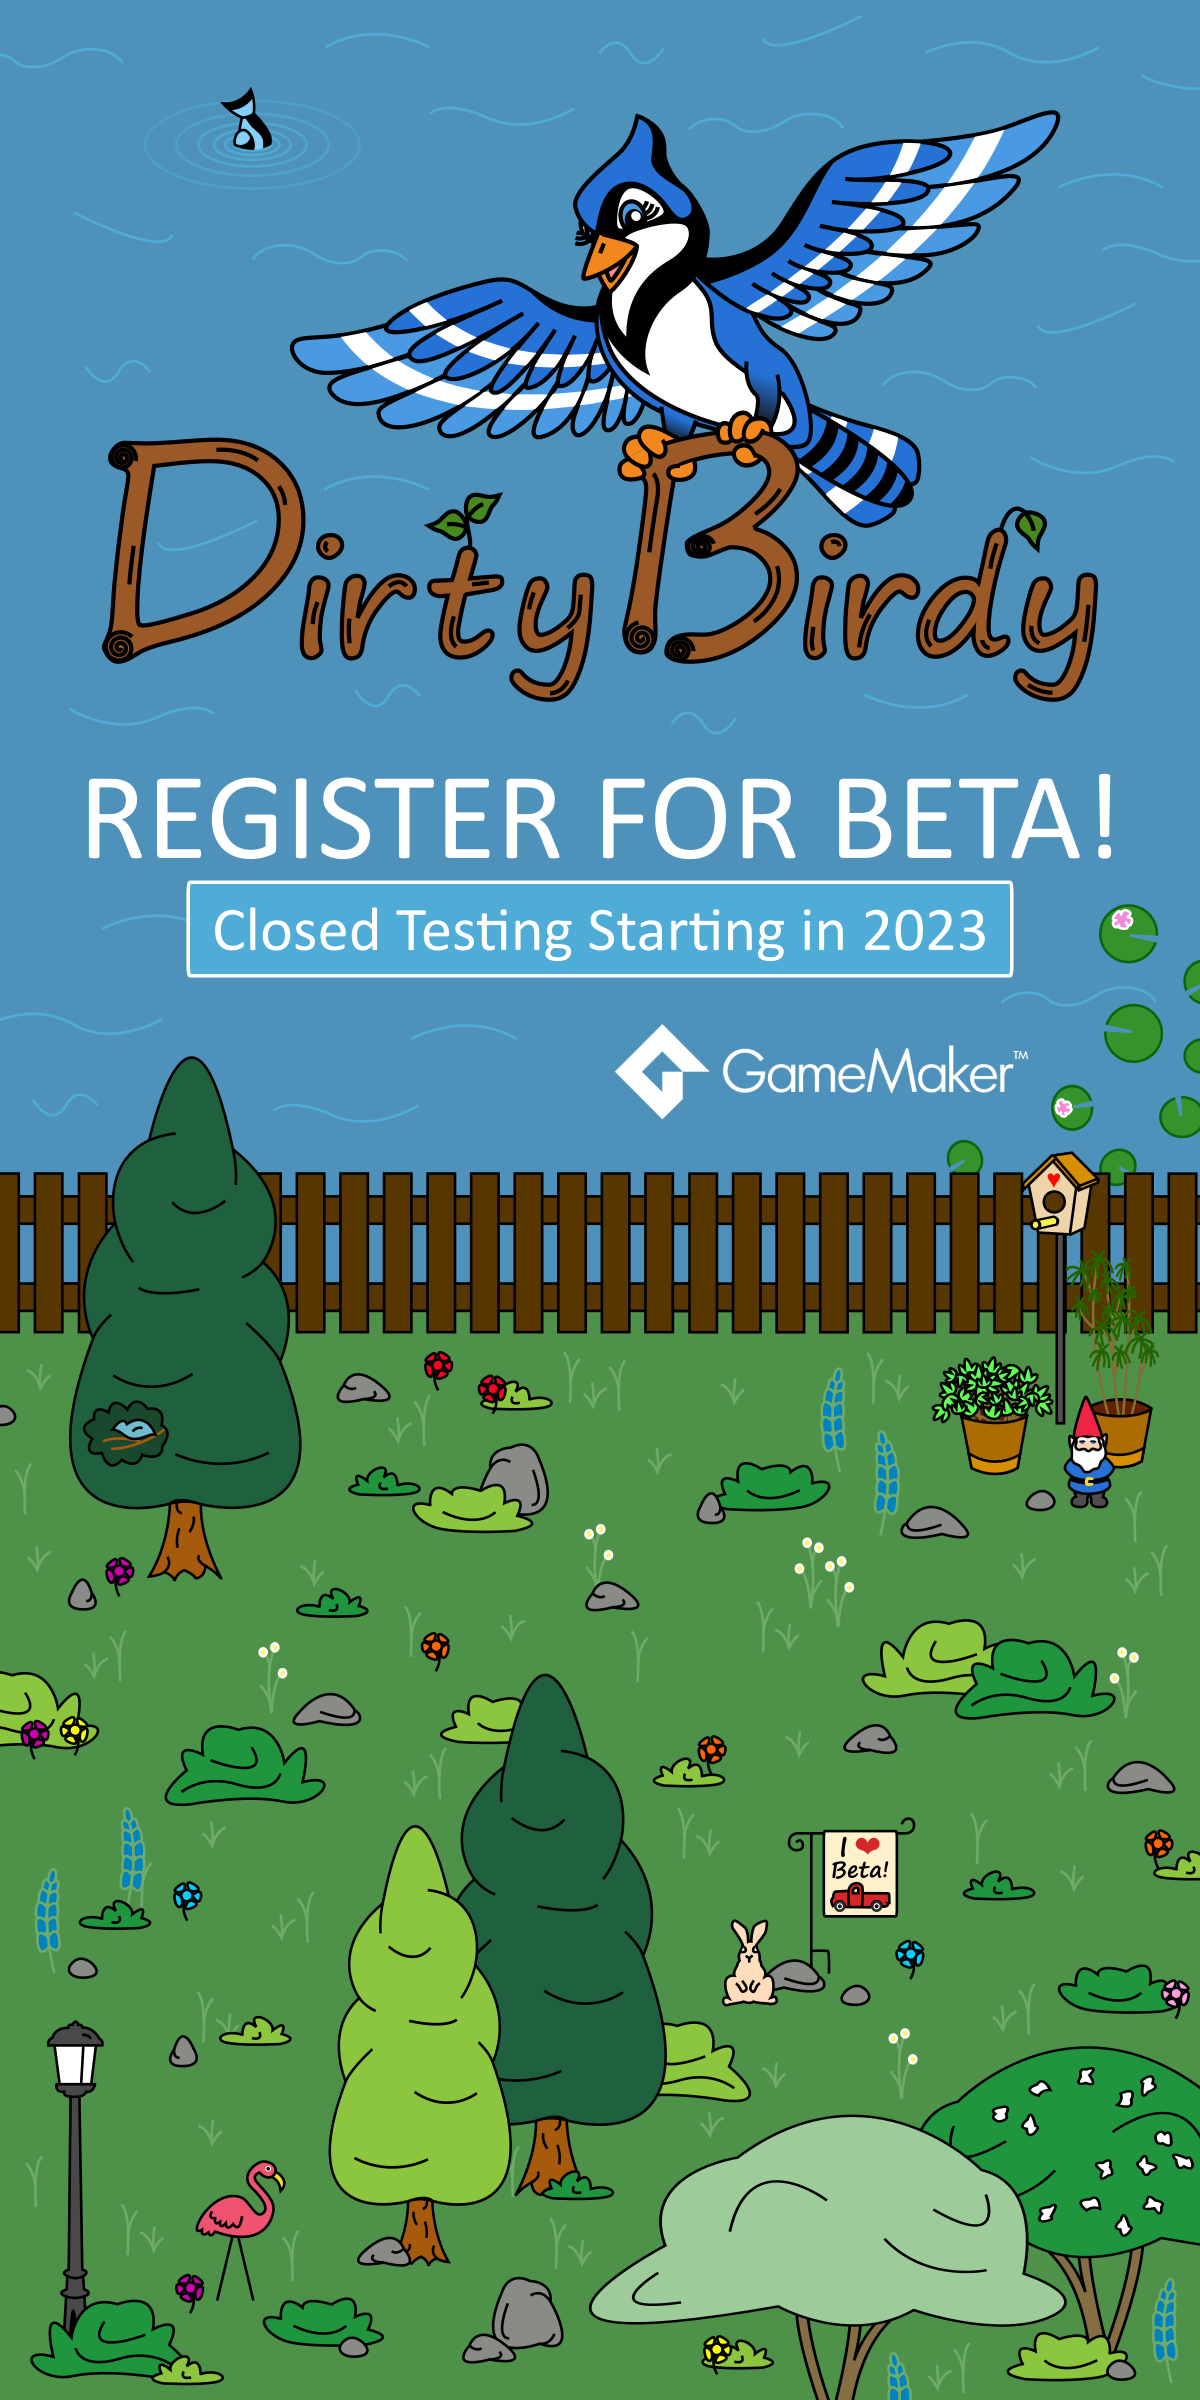 Dirty Birdy Register for Beta Mobile